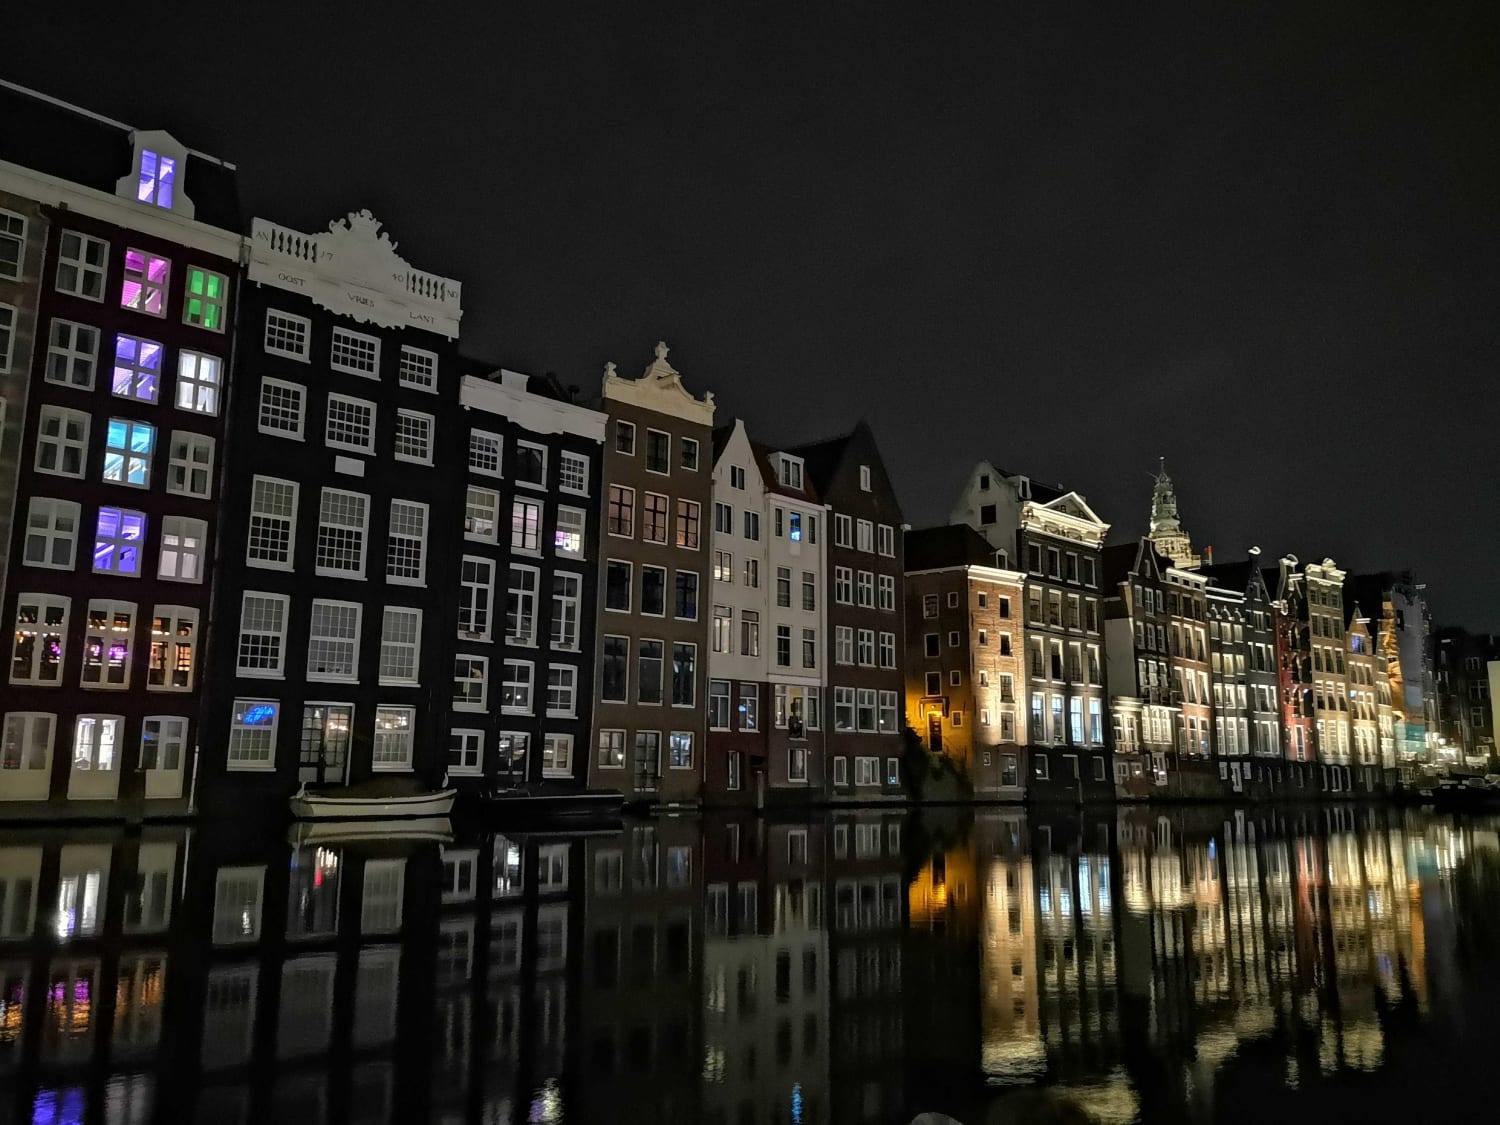 Hopped onto my boat for a midnight cruise around downtown Amsterdam last weekend - and almost got fined for improper light placement but well worth it.